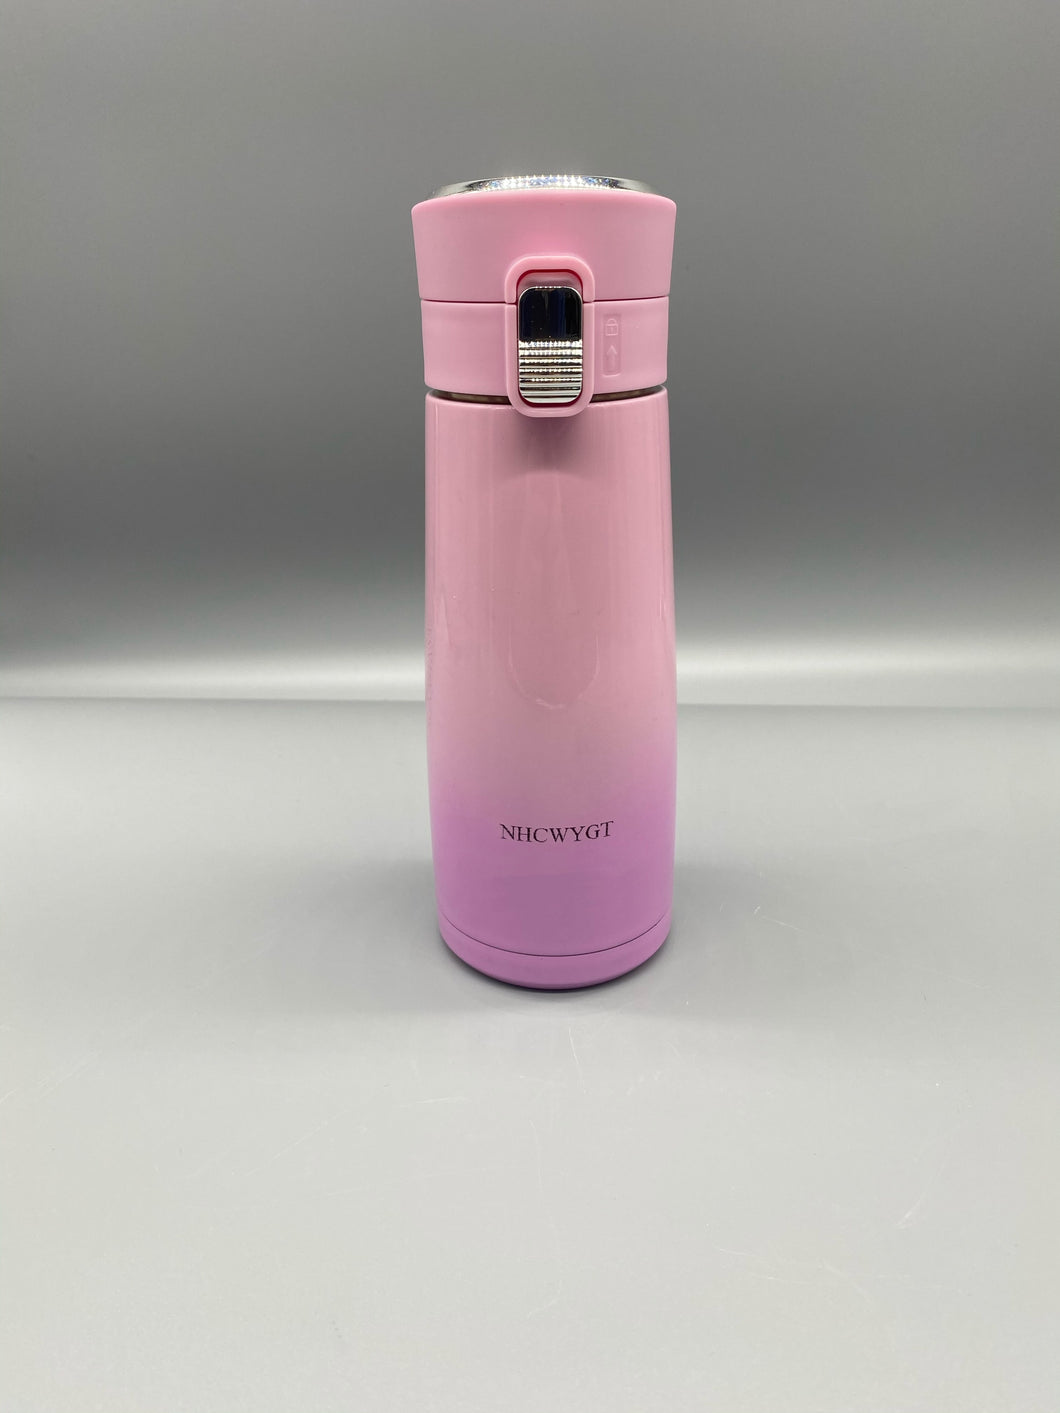 NHCWYGT Travel mugs,double wall heat insulated travel mugs, stainless steel vacuum heat insulated cups, coffee thermos bottles, tea infusion bottles, travel thermos cups, BPA Free.